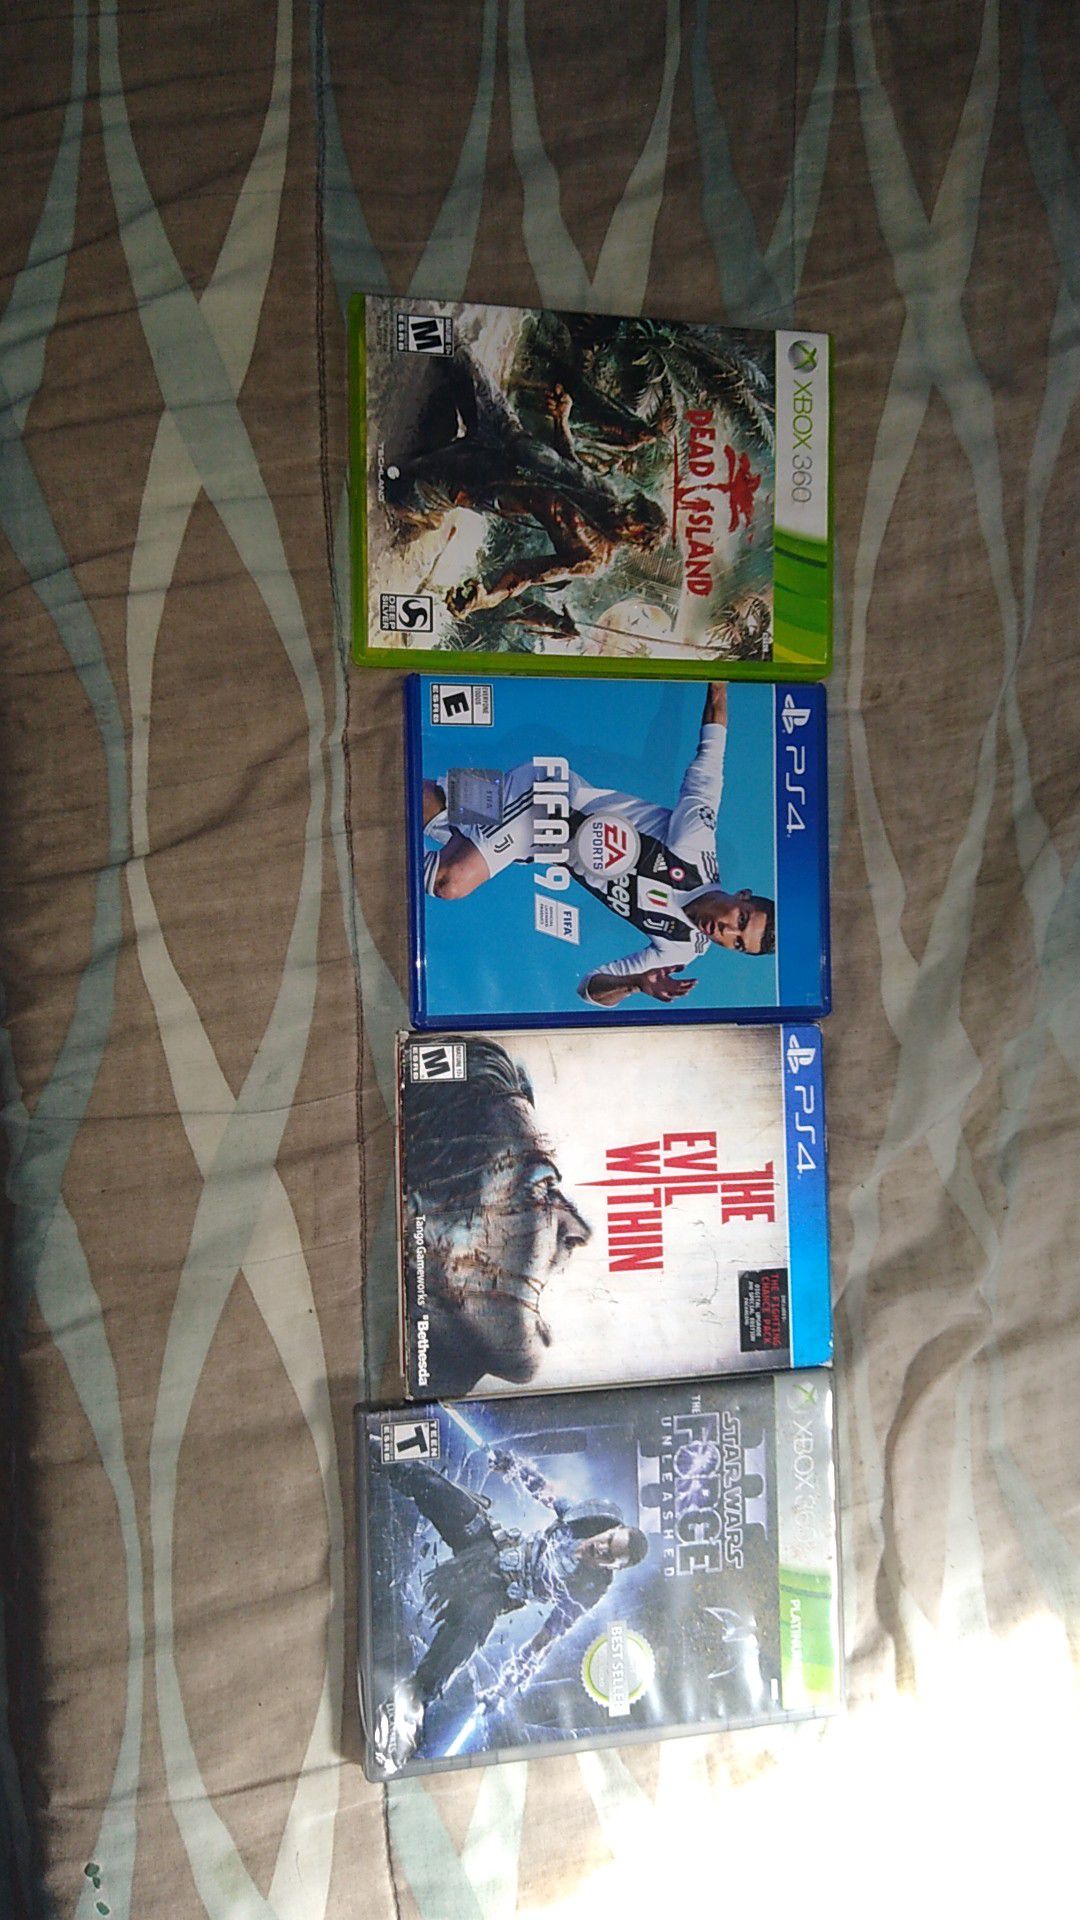 Ps4 and Xbox 360 games